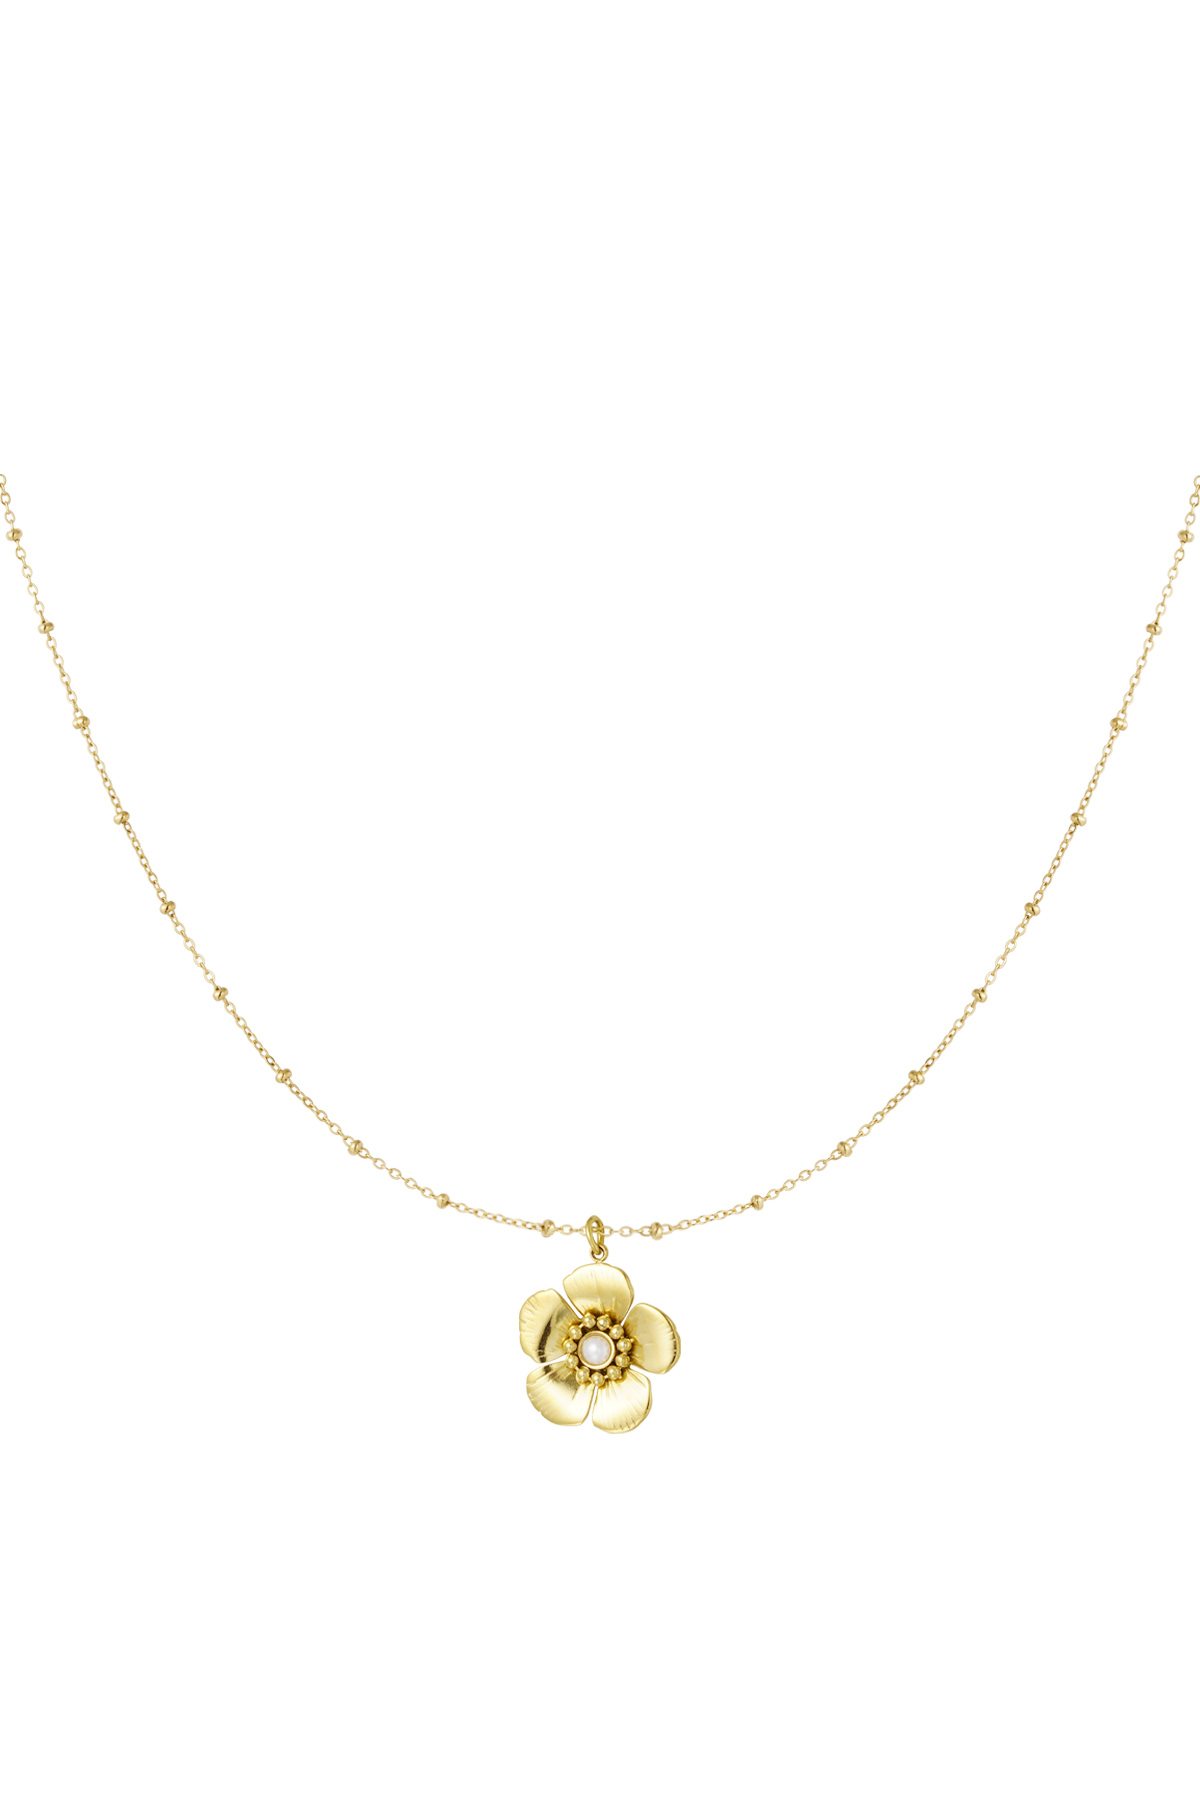 Ball necklace with flower pendant and pearl - gold 